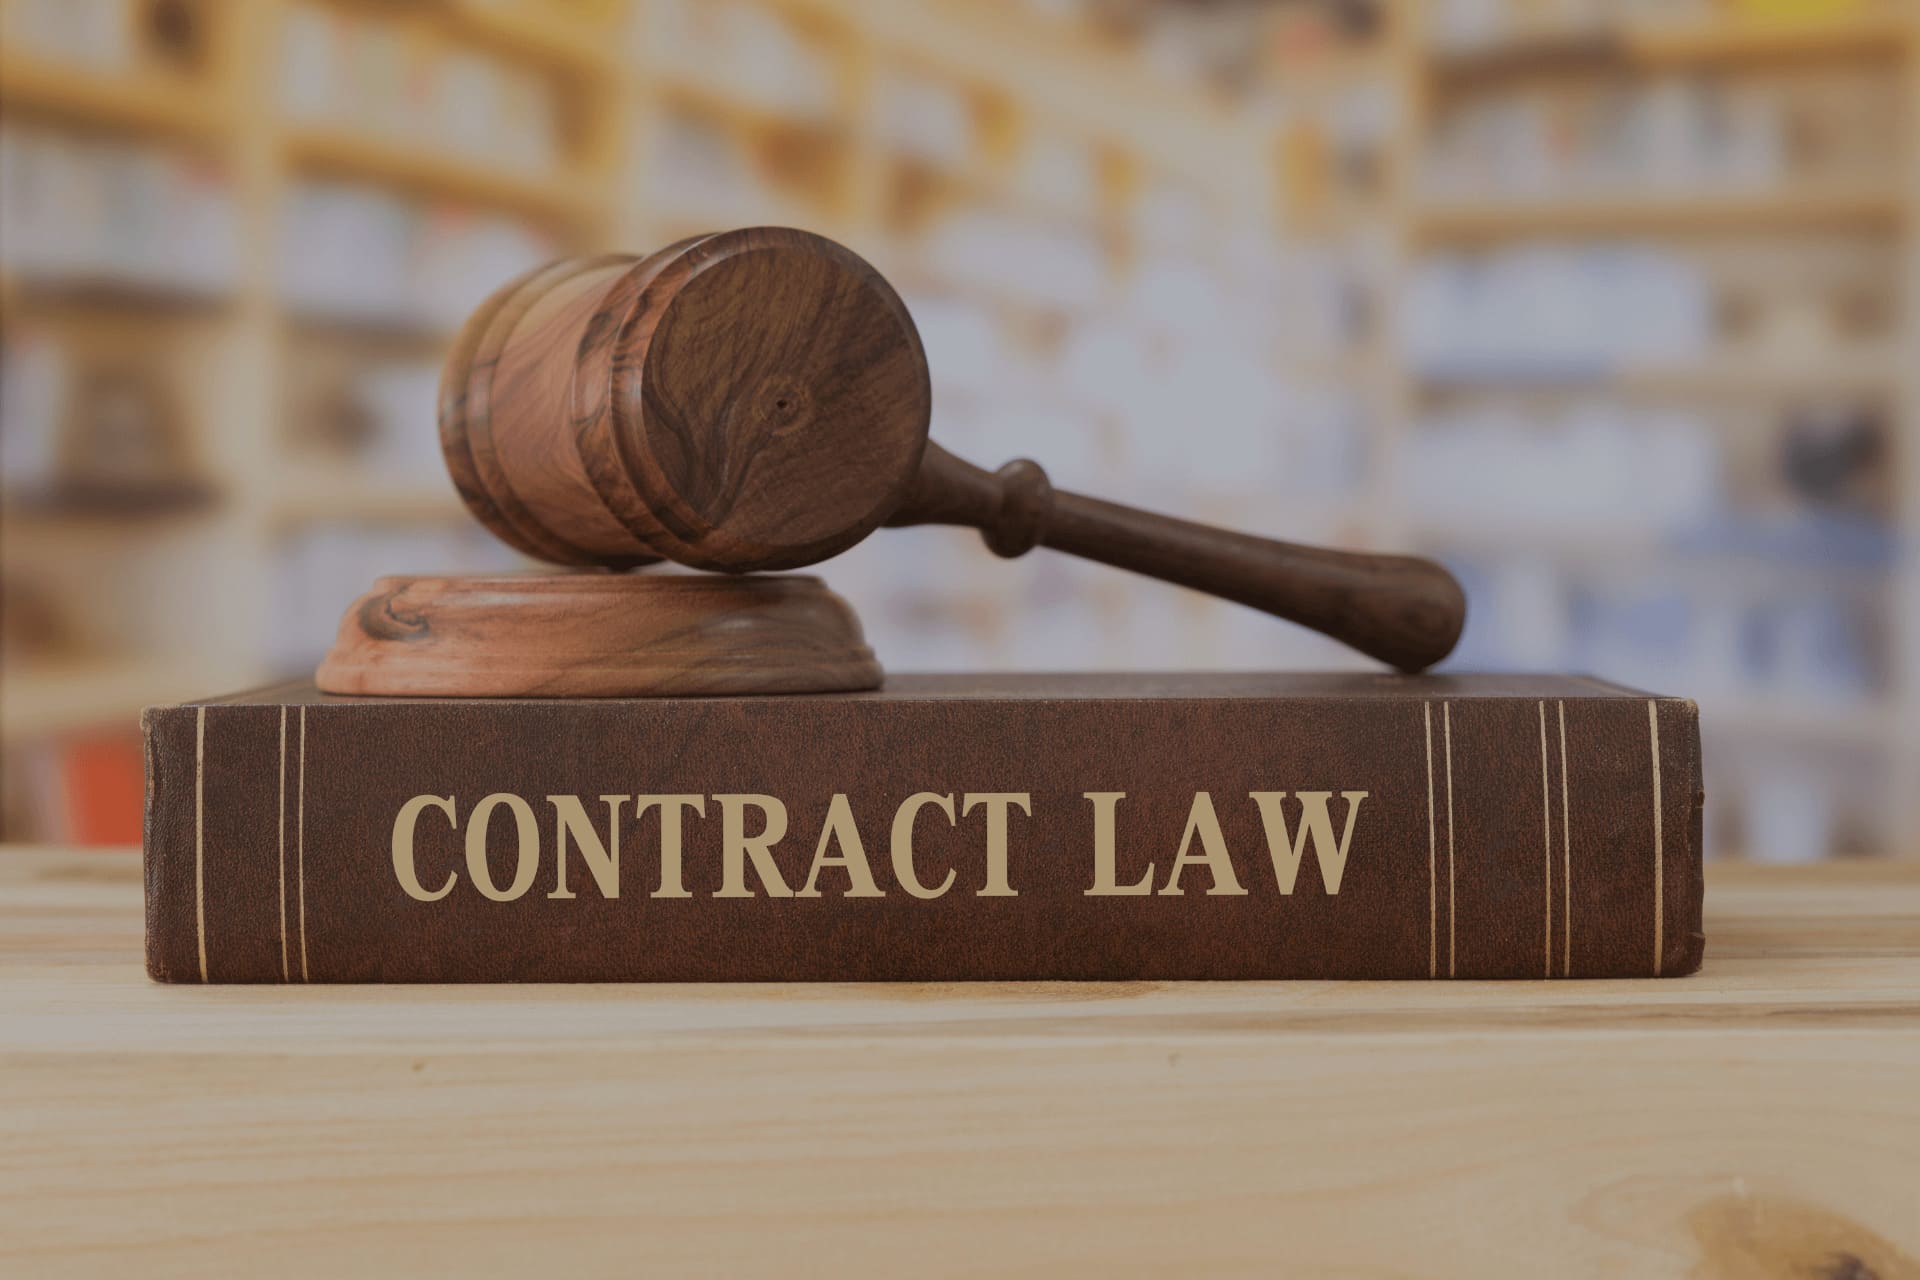 Thailand's Contract Law